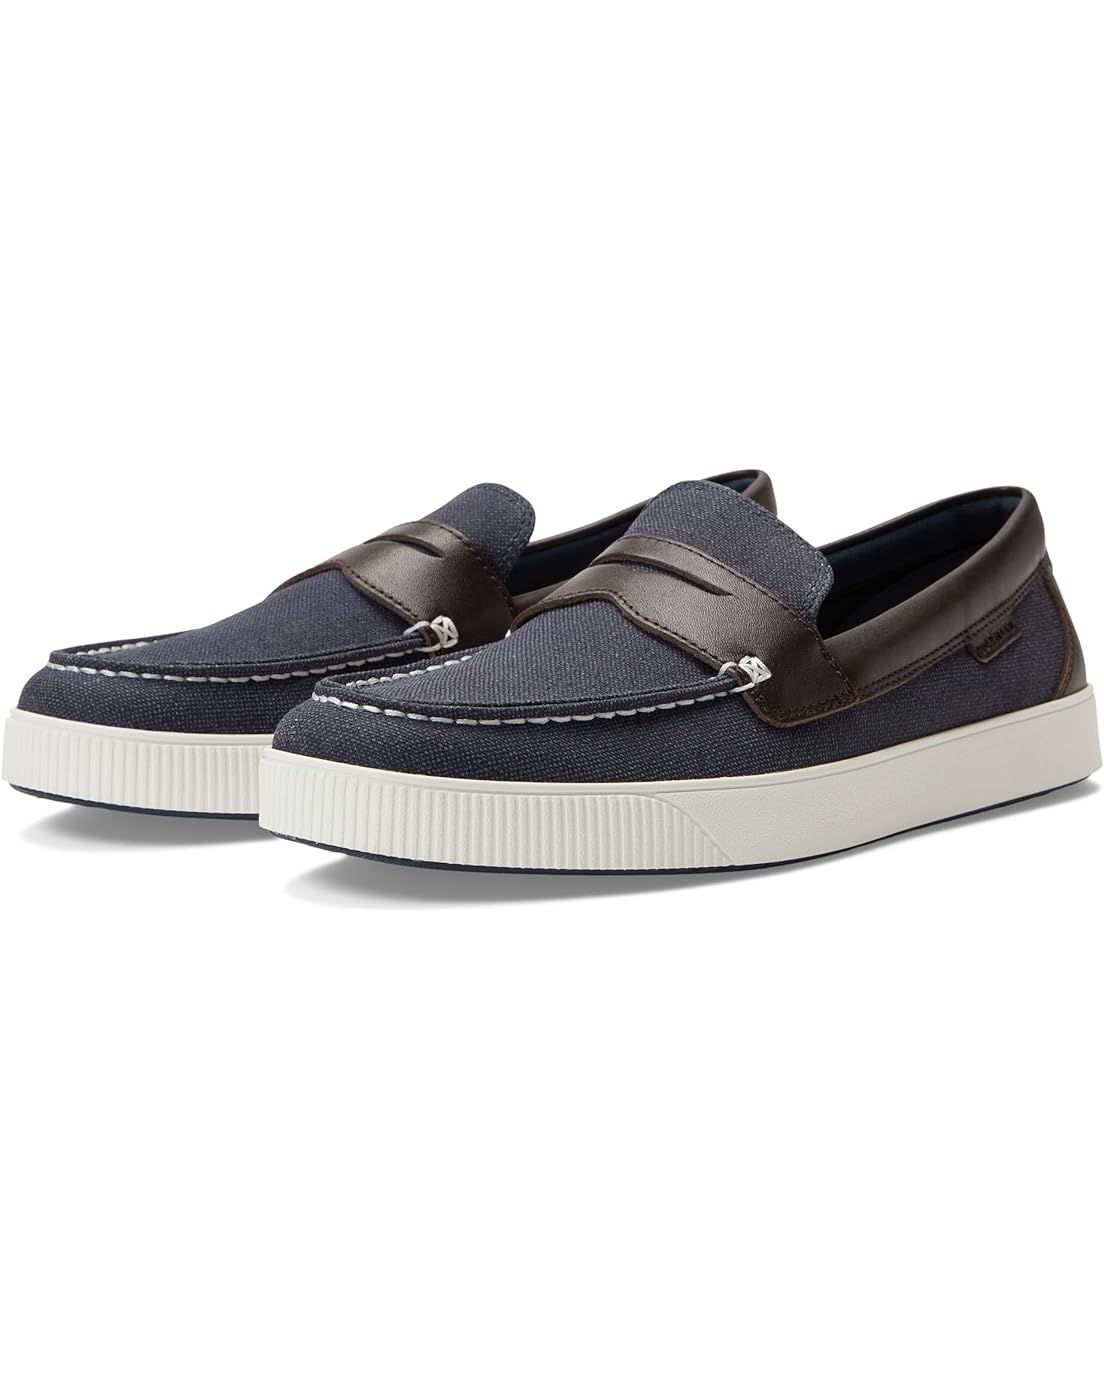 Cole Haan Nantucket 2.0 Penny Loafer